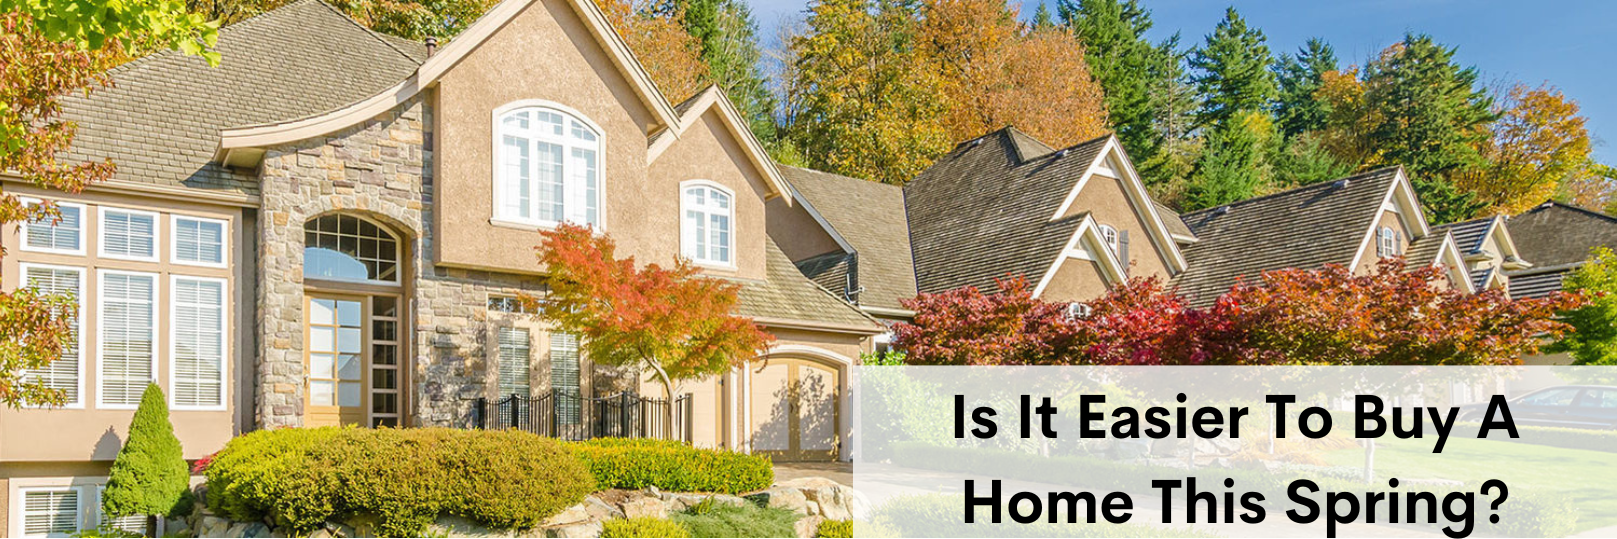 Is It Easier To Buy A Home This Spring?